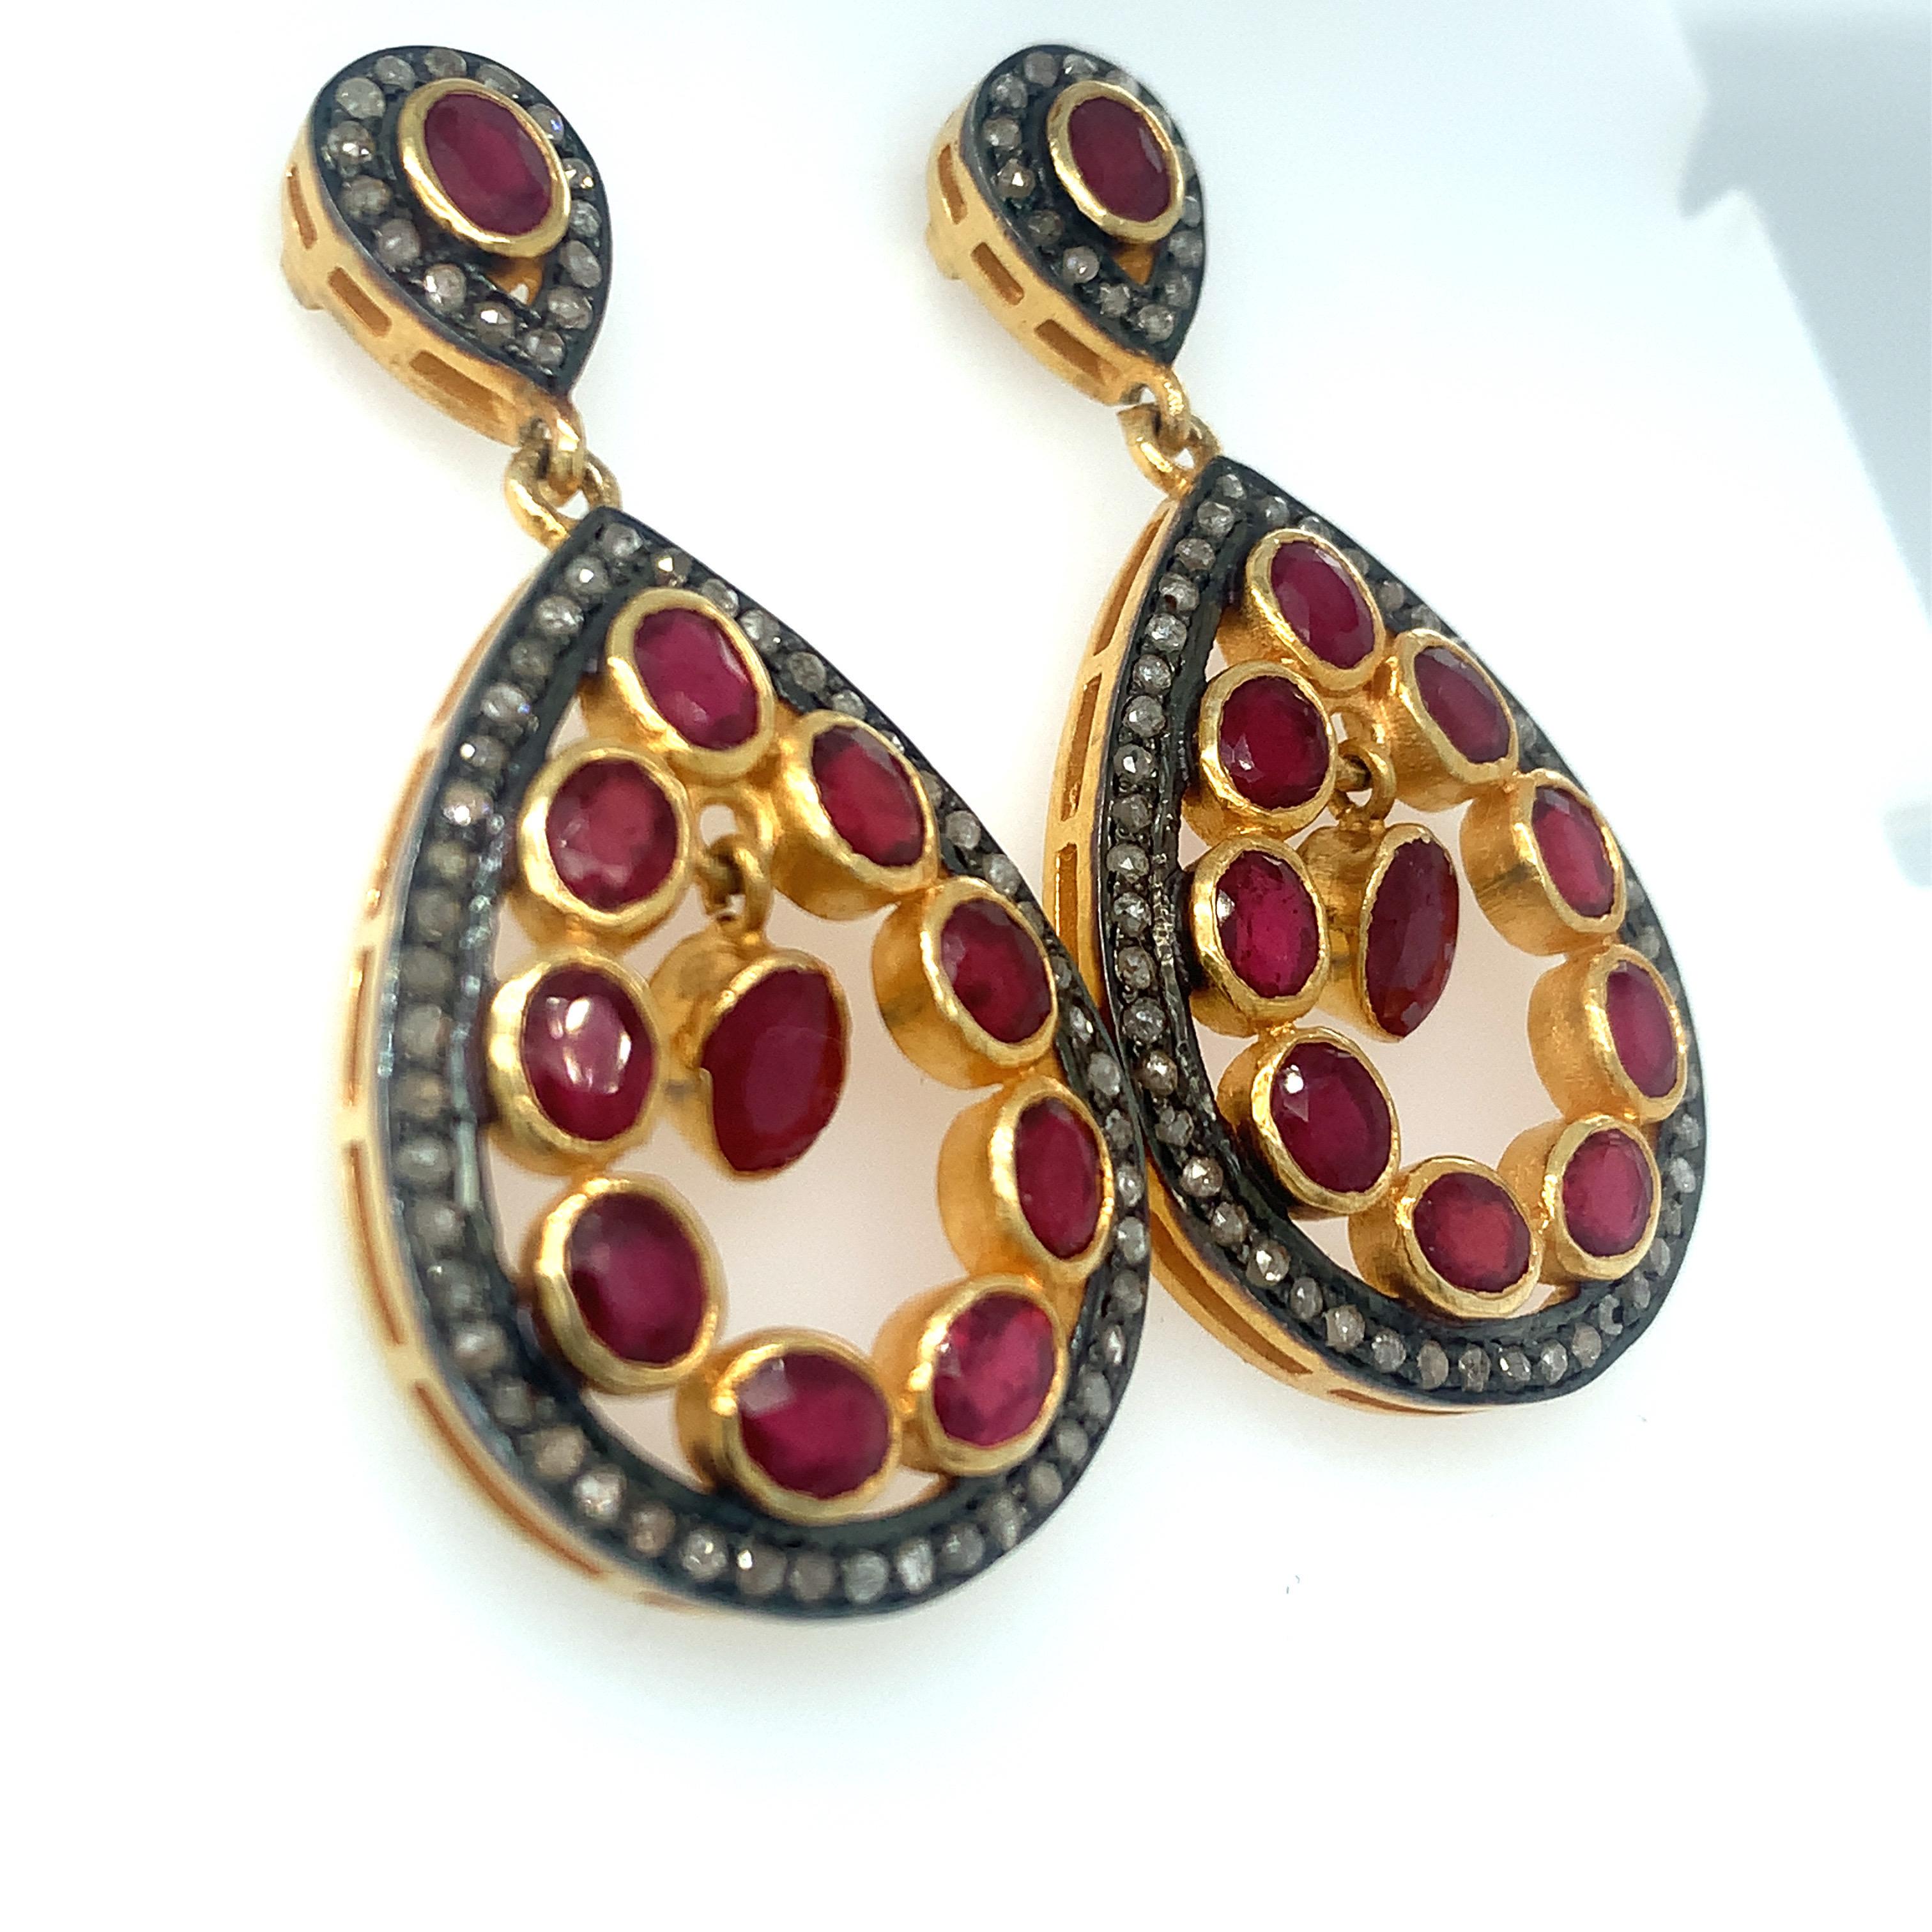 This stunning ruby diamond chandelier earrings comprises 22 pieces of oval rubies with accents of diamonds. It has yellow gold vermeil over sterling silver with post back closure.
Hand cut and polished rubies and crafted by skilled craftsmen.